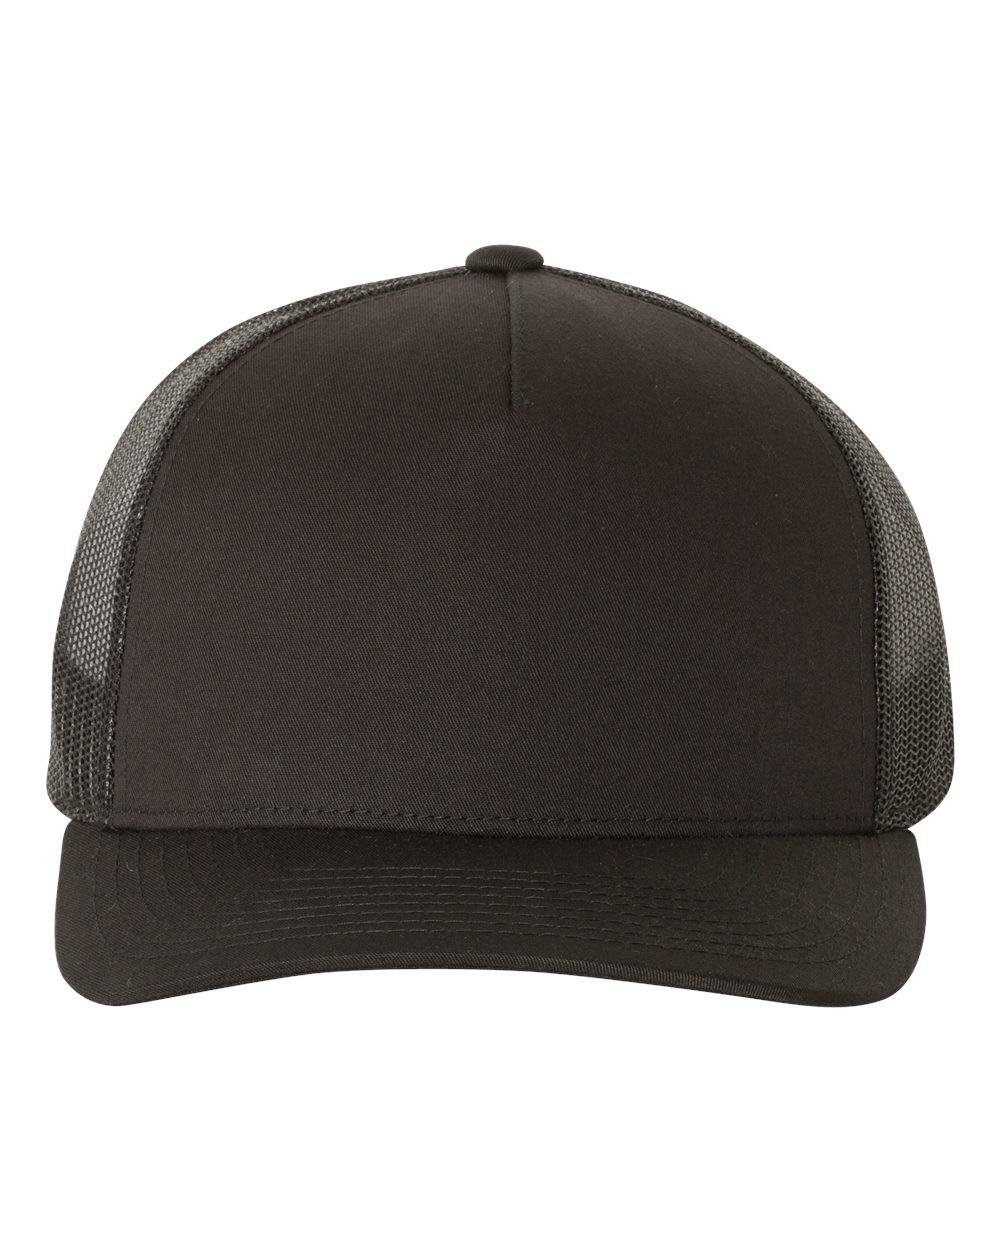 1 Leather Sample Hat DEAL!